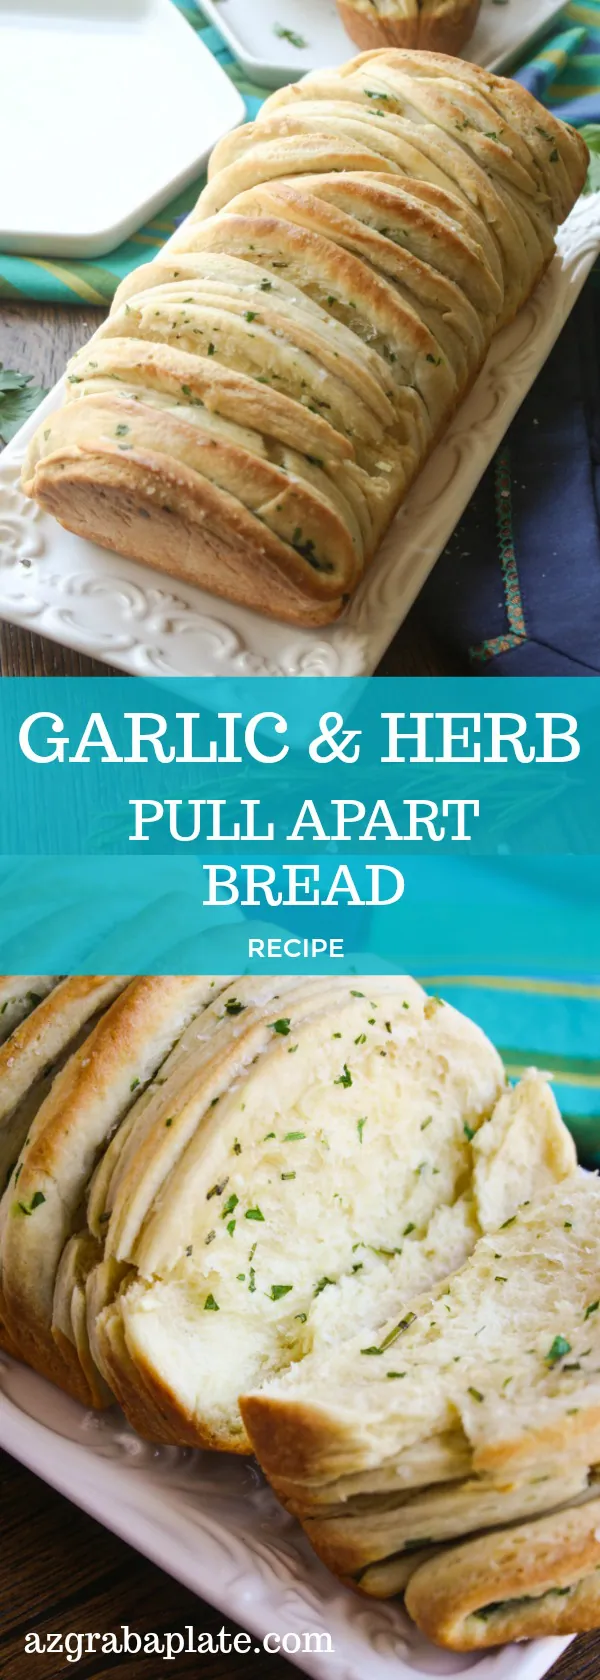 Garlic & Herb Pull Apart Bread is a fun treat. No cutting, simply pull and enjoy all the great flavors!